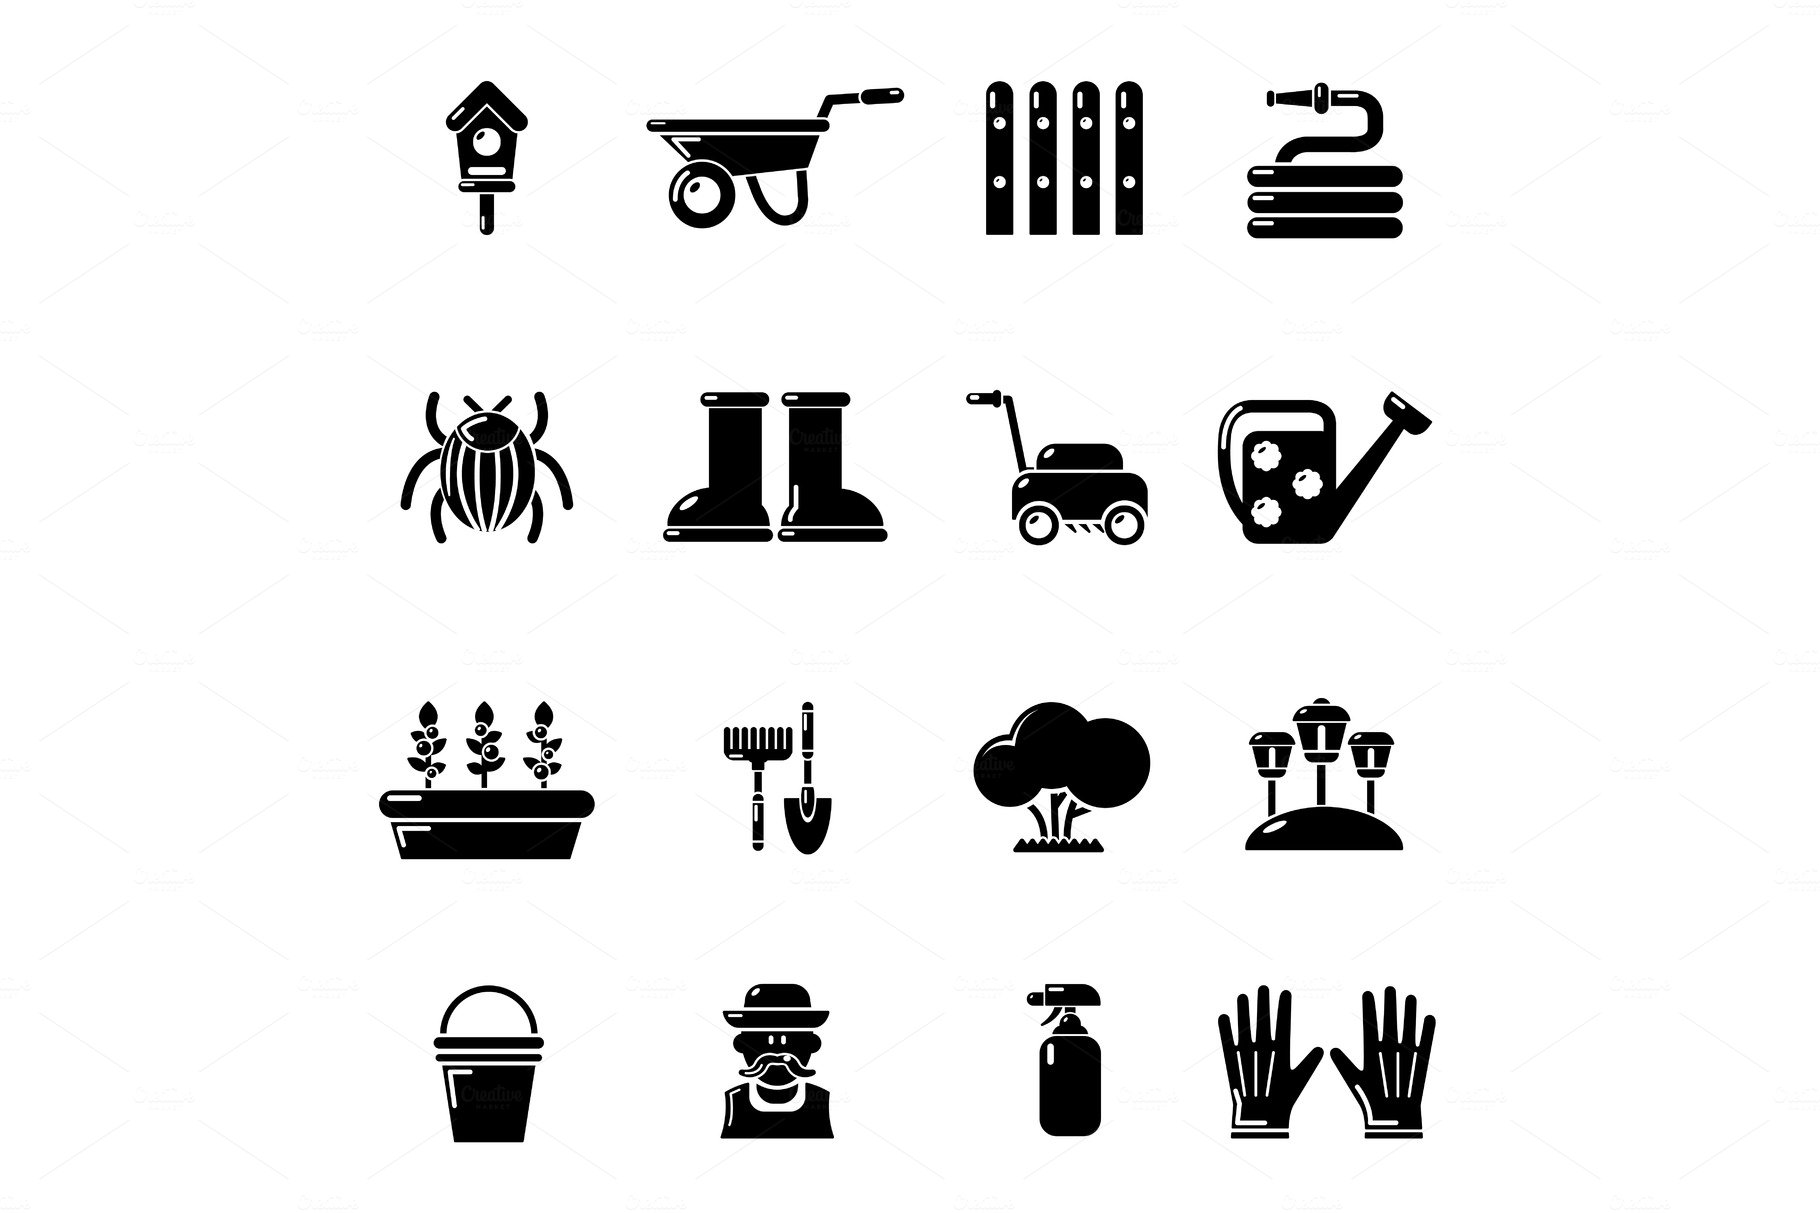 Gardener icons set, simple style cover image.